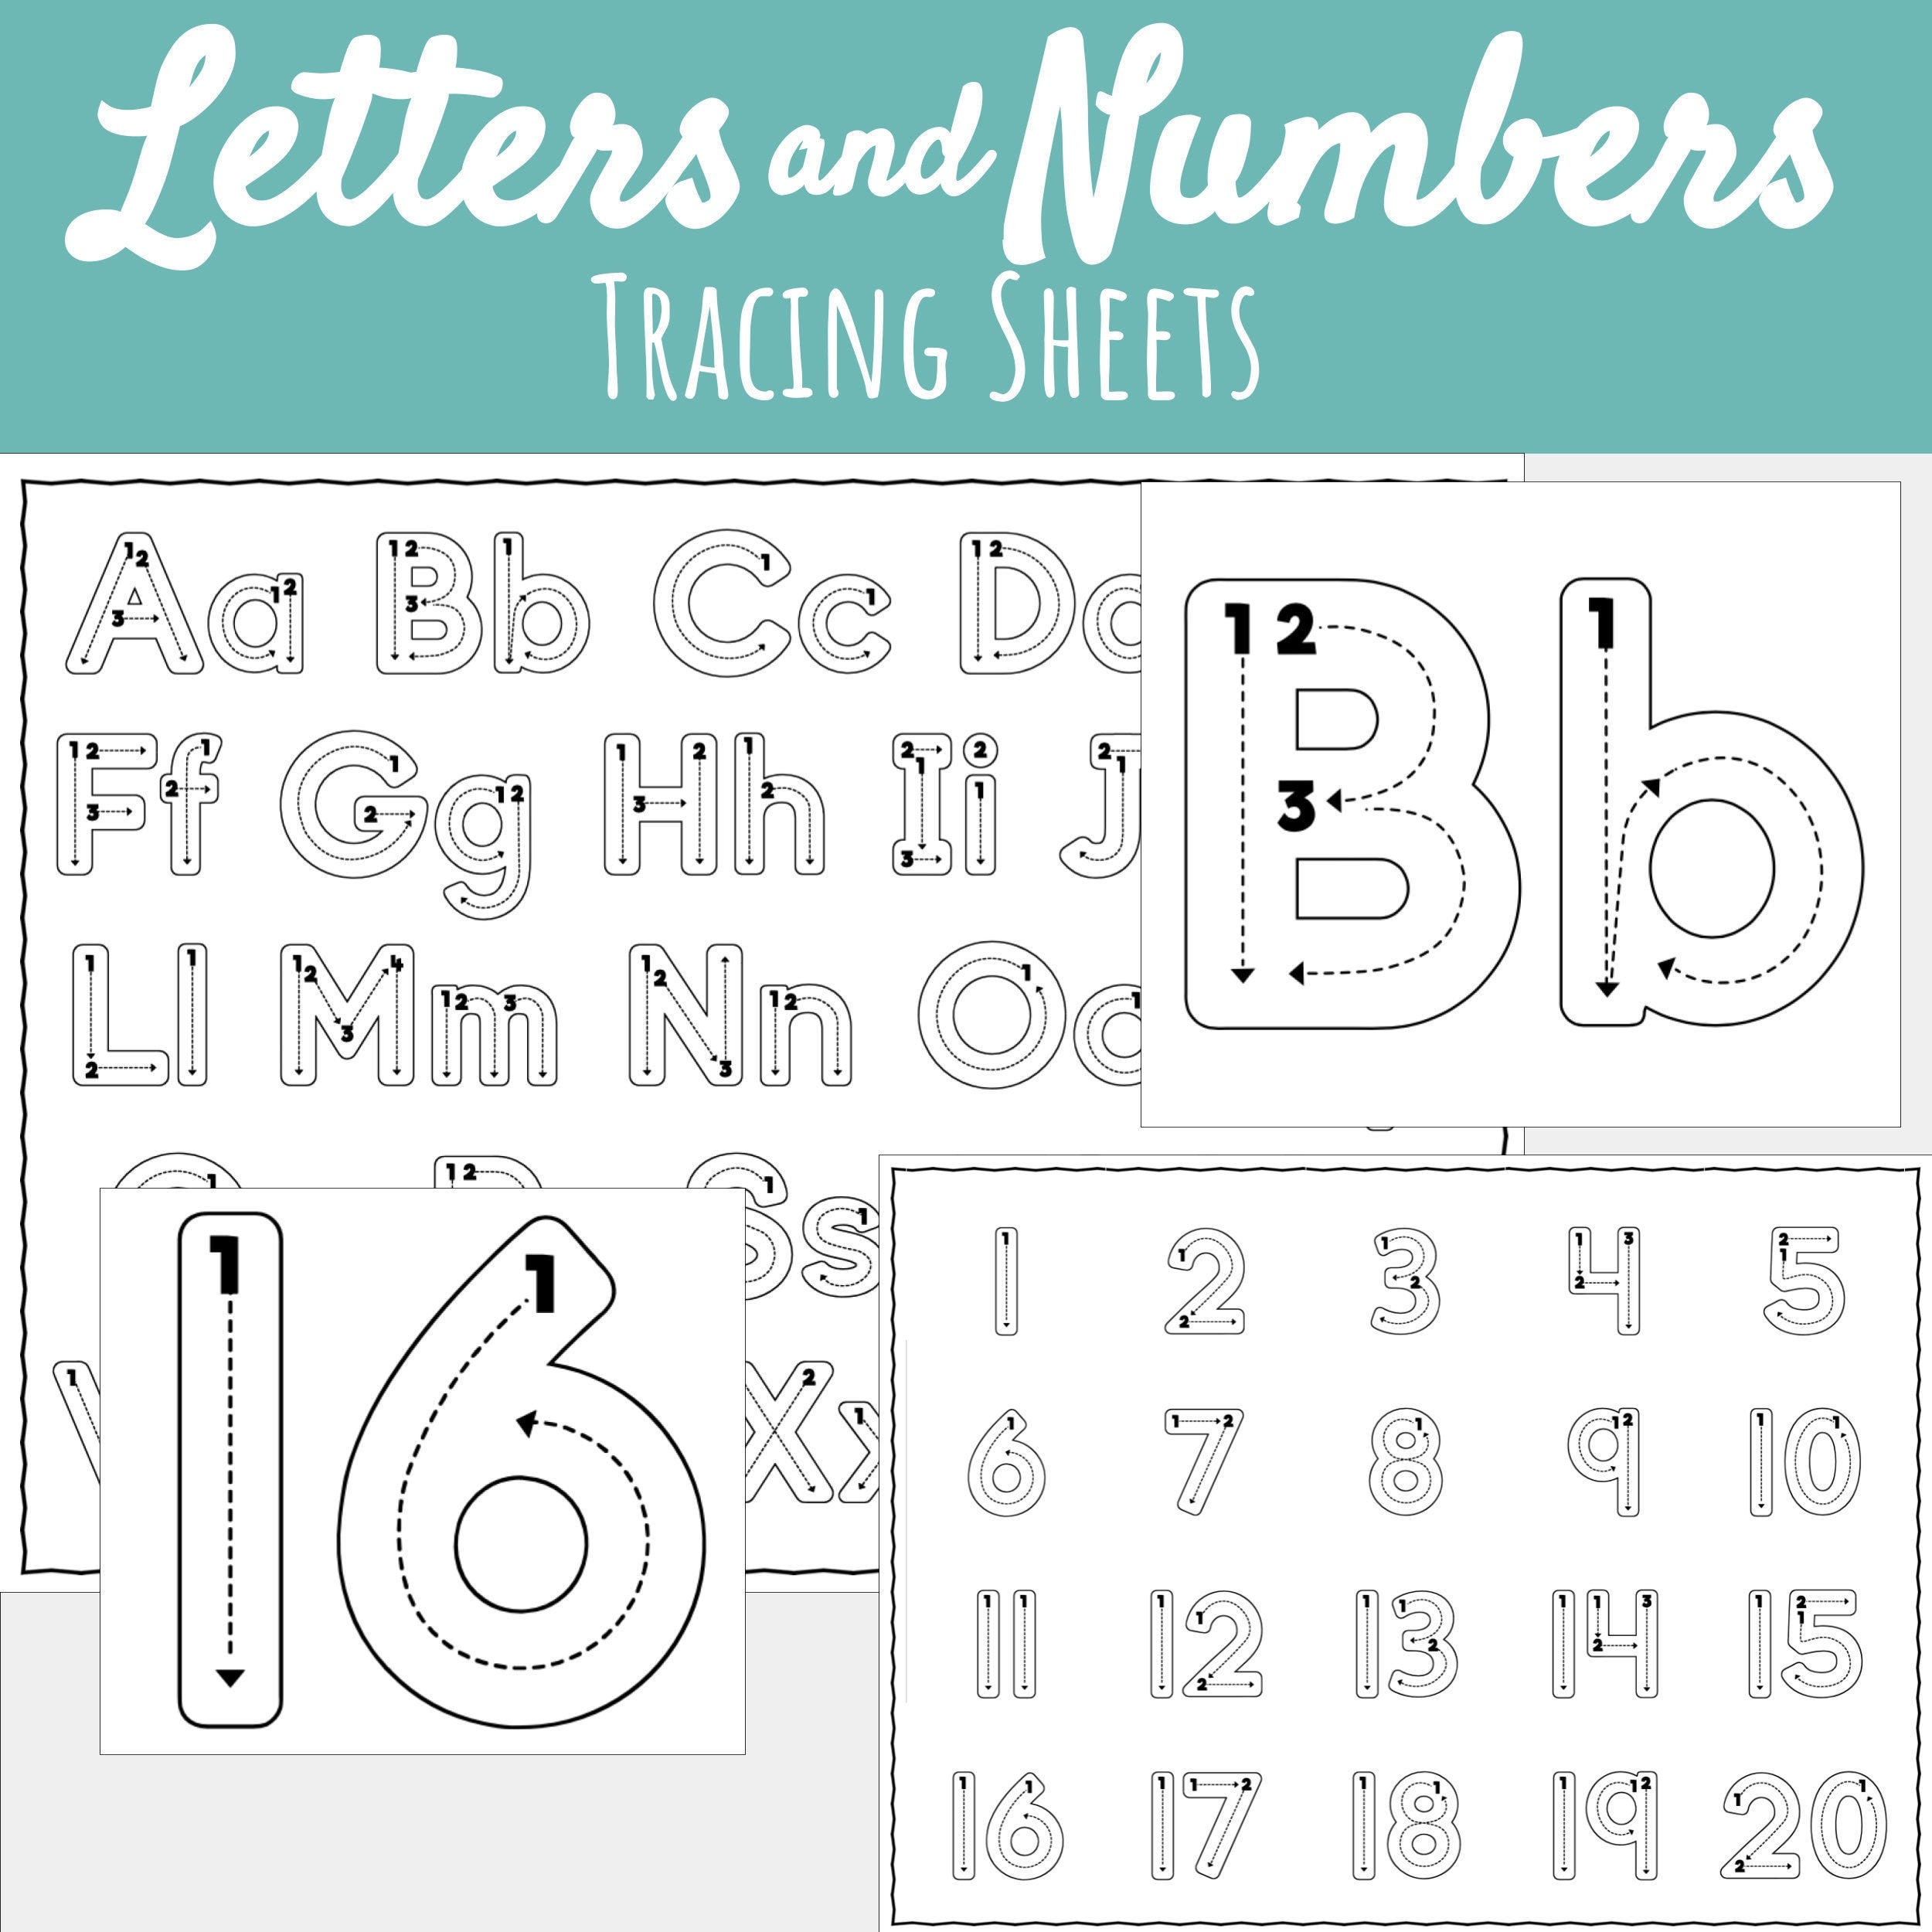 ABC Letter Tracing for Kids ages 3-5: Handwriting Practice Book | Preschool  Workbook for age 3-4, 4-5 | Pre K and Kindergarten Activity Book for